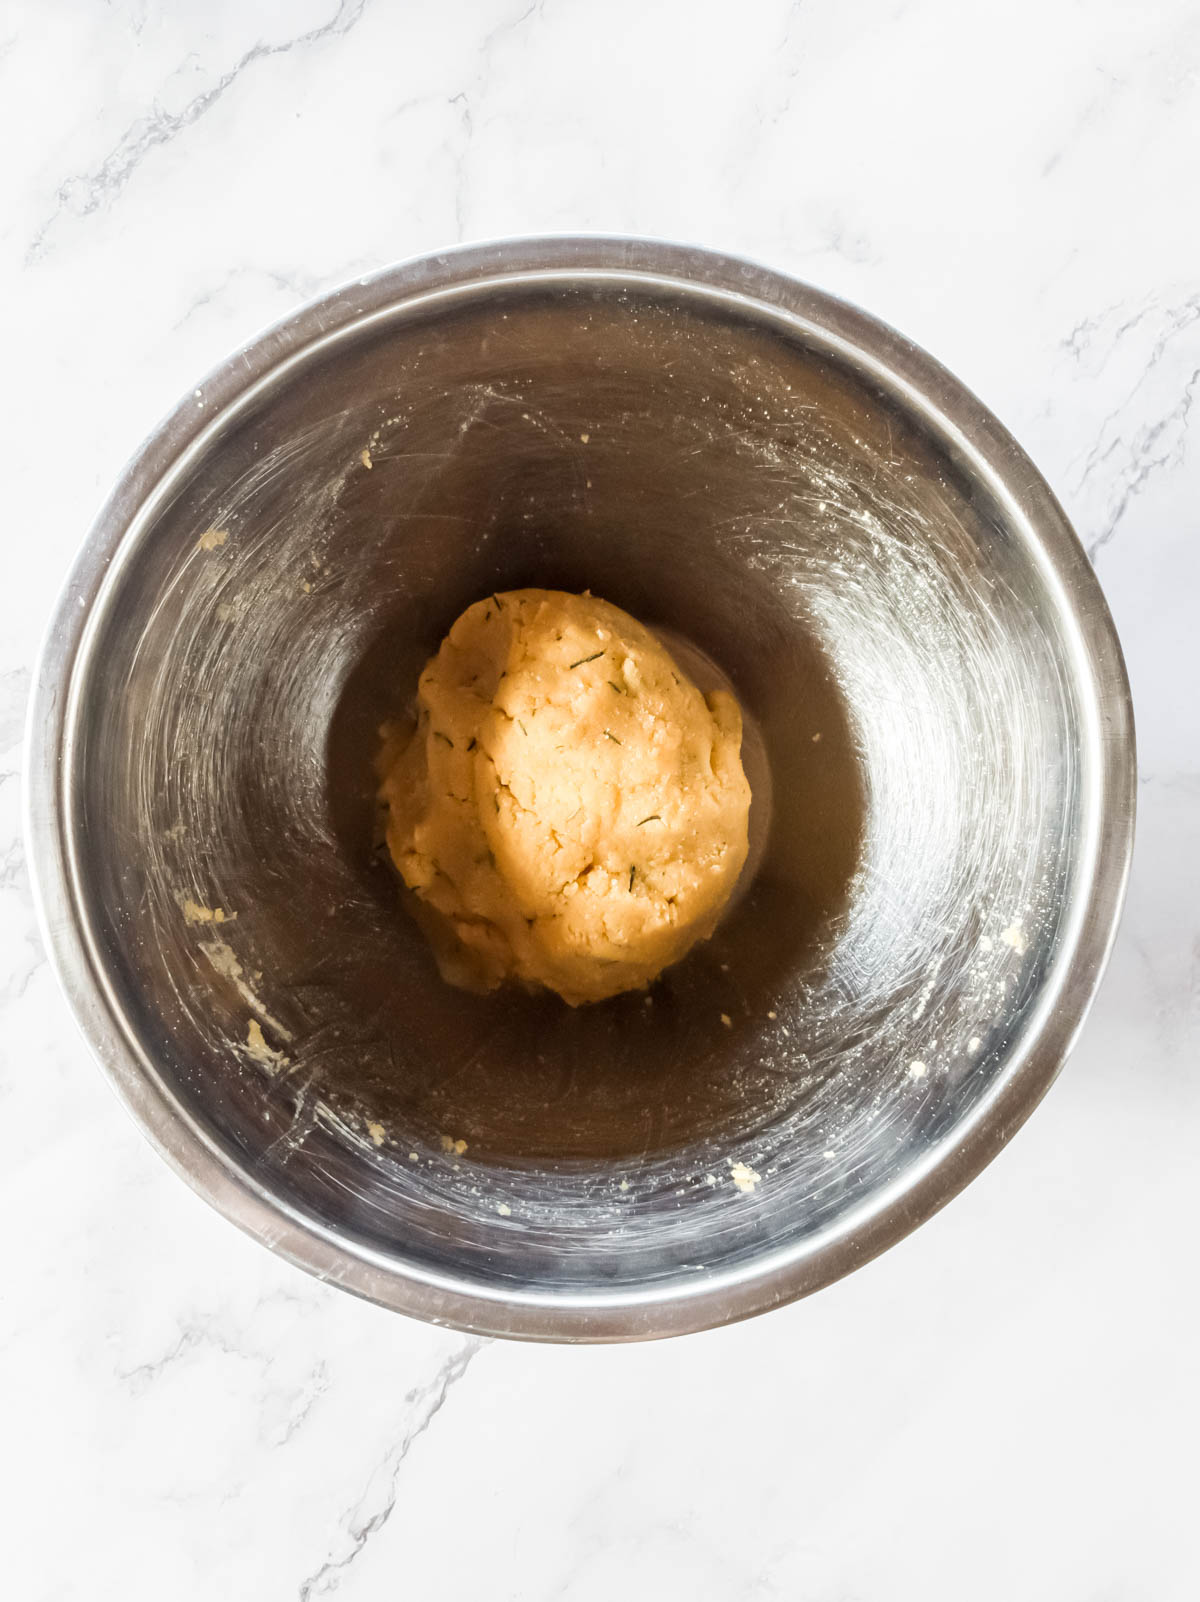 A round ball of coconut flour dough in mixing bowl.